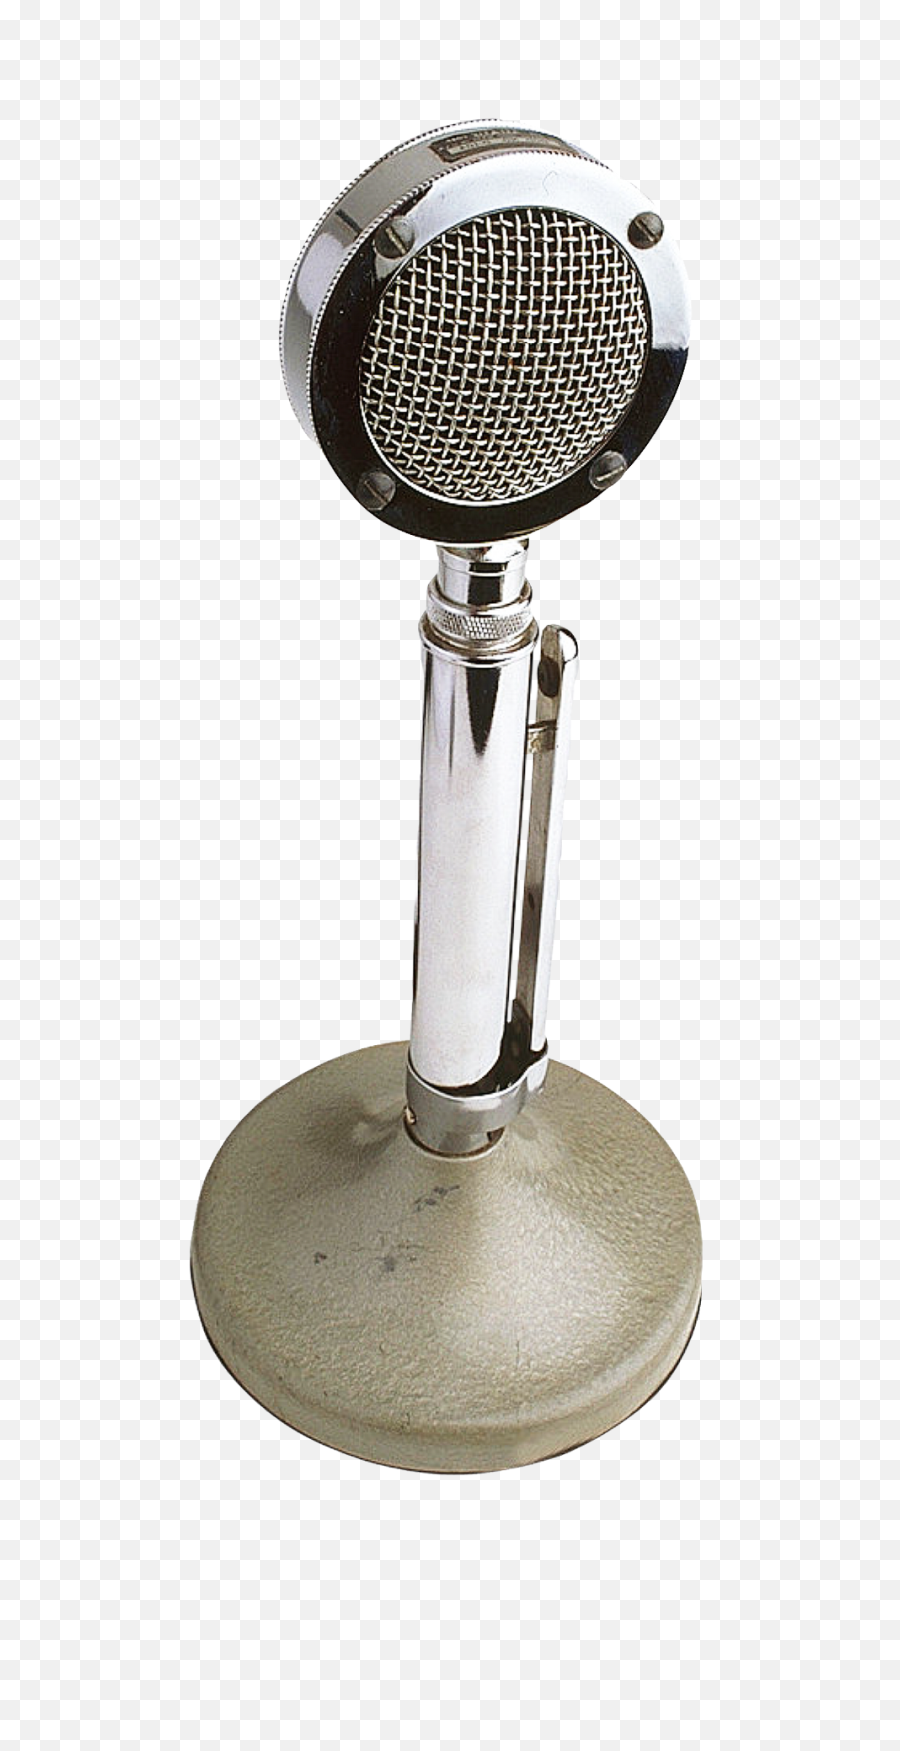 Microphone Png Image - Purepng Free Transparent Cc0 Png Microphone,Microphone Stand Png